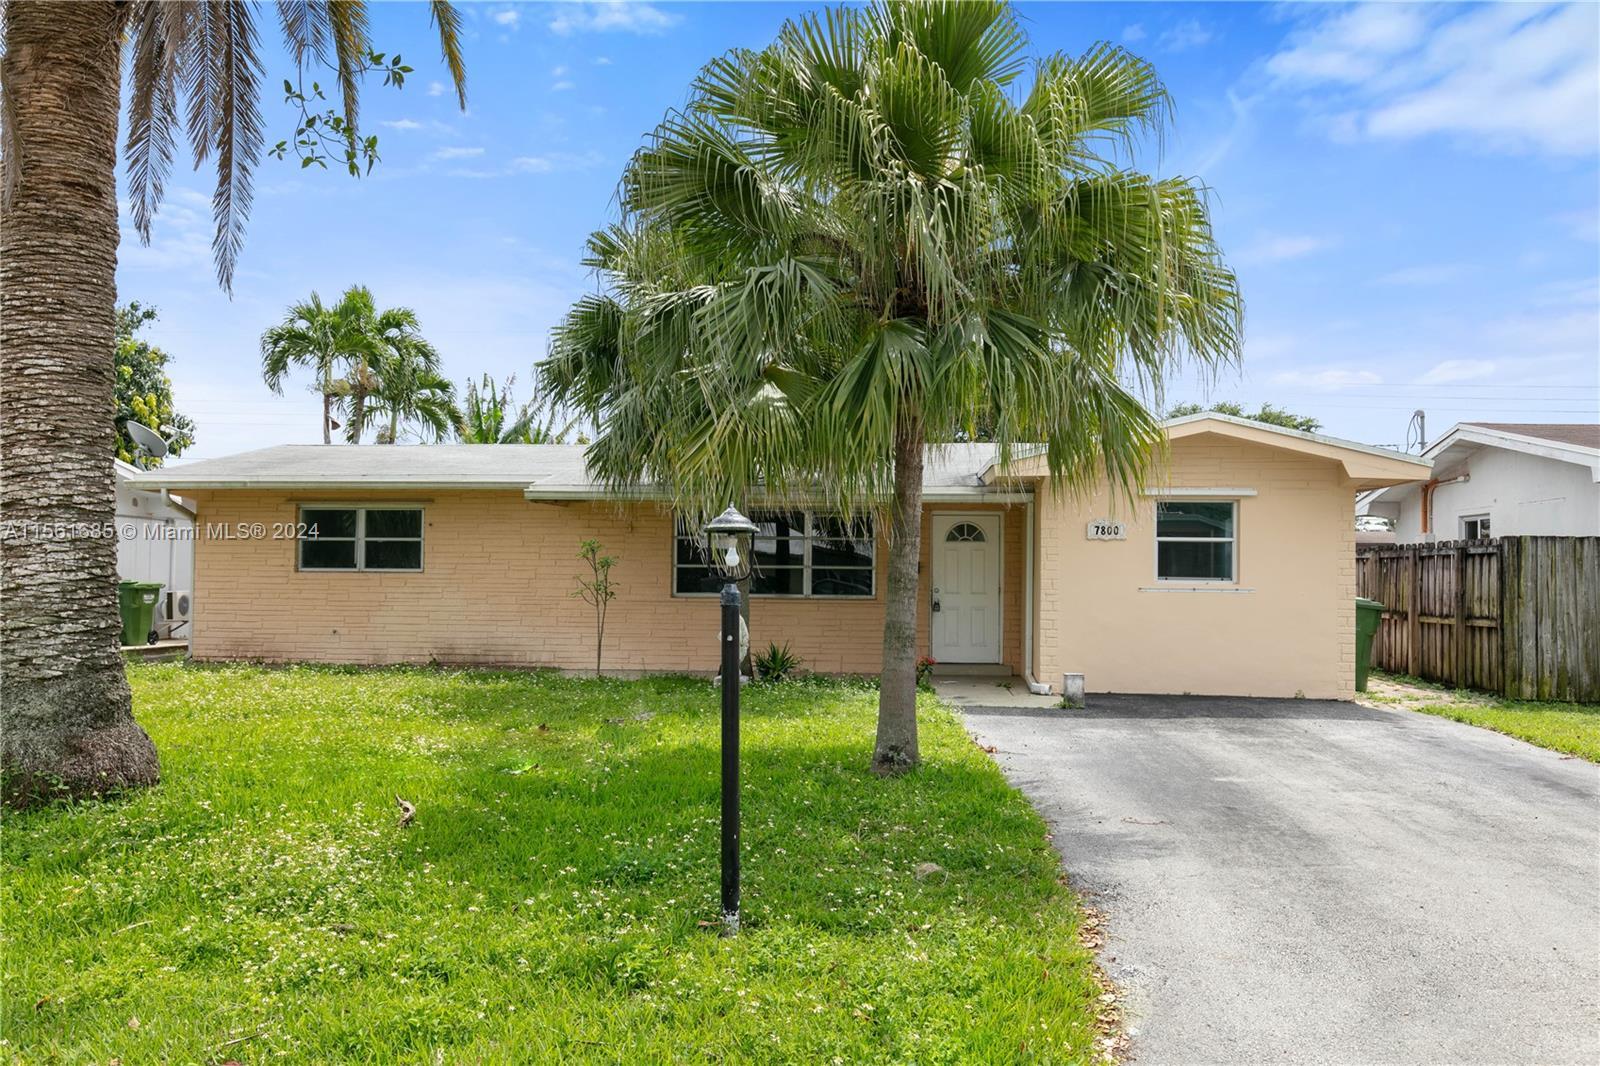 Photo of 7800 NW 15th St in Pembroke Pines, FL